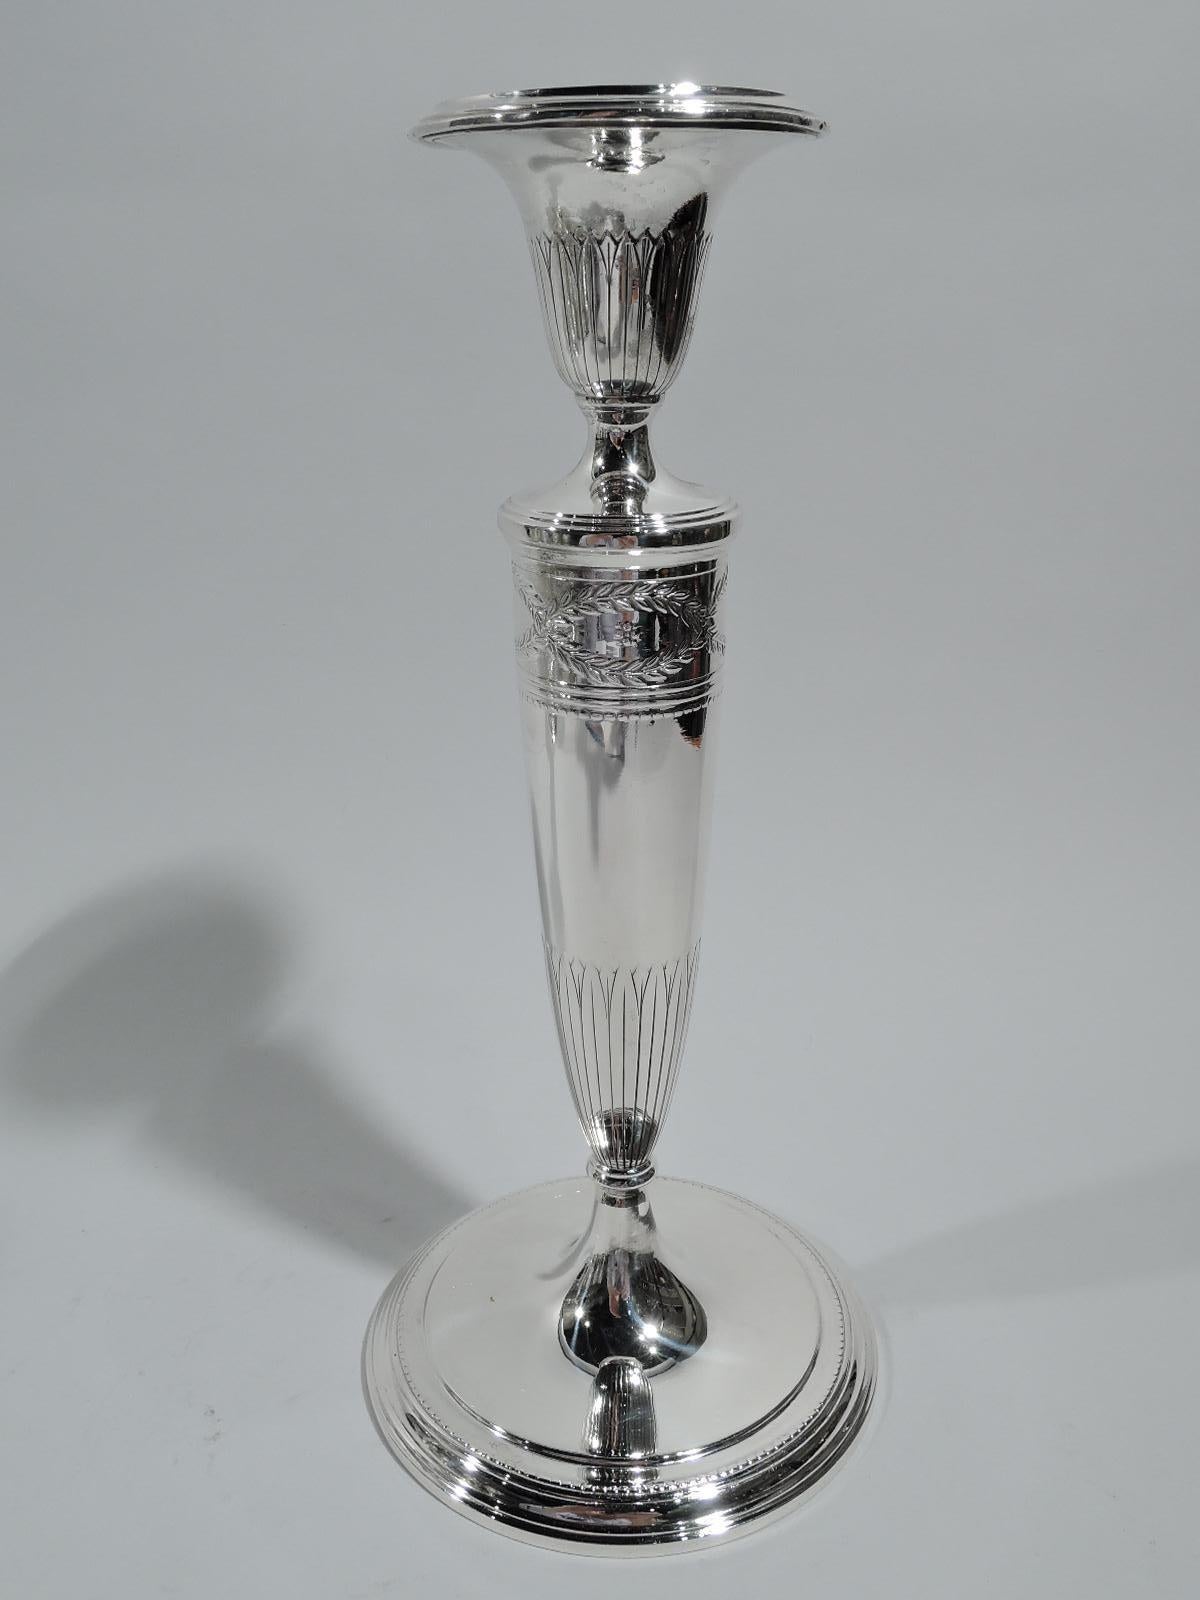 Pair of Winthrop sterling silver candlesticks. Made by Tiffany & Co. in New York, ca 1922. Each: Tapering columnar shaft on raised foot. Urn socket with detachable bobeche. Shaft top has the Classic laurel-wreath border inset with flower heads. Urn